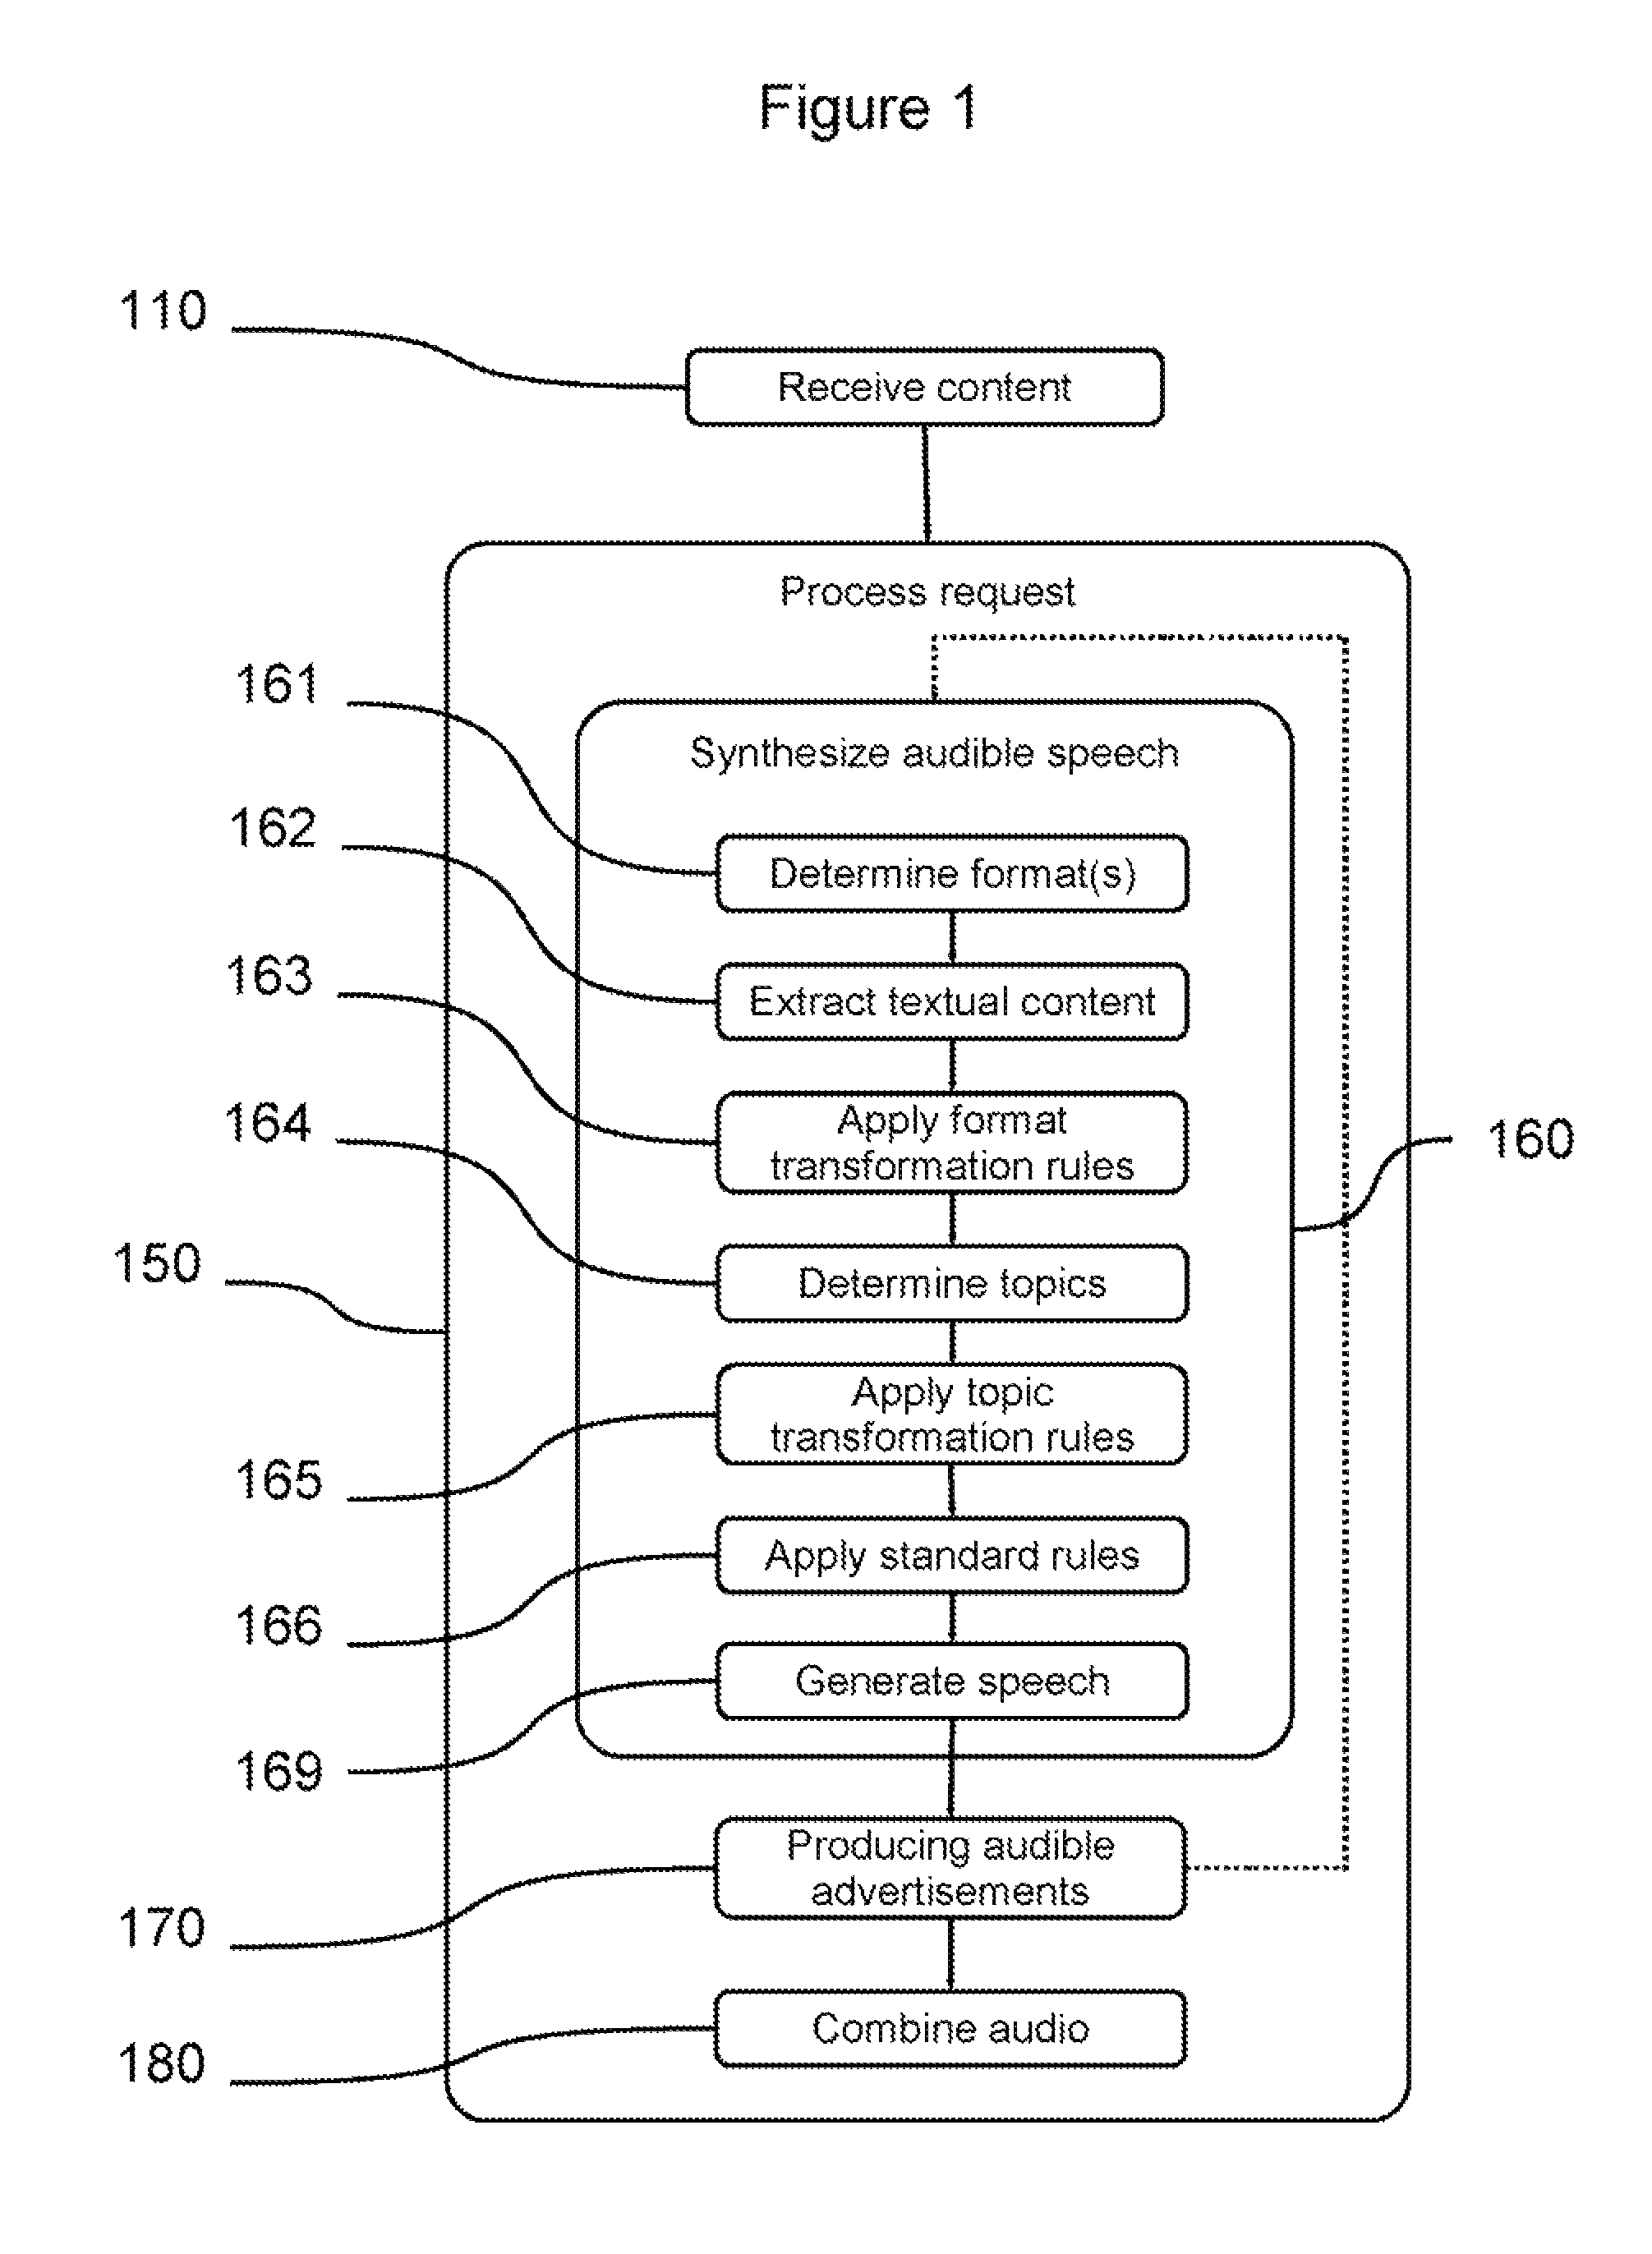 Content and advertising service using one server for the content, sending it to another for advertisement and text-to-speech synthesis before presenting to user